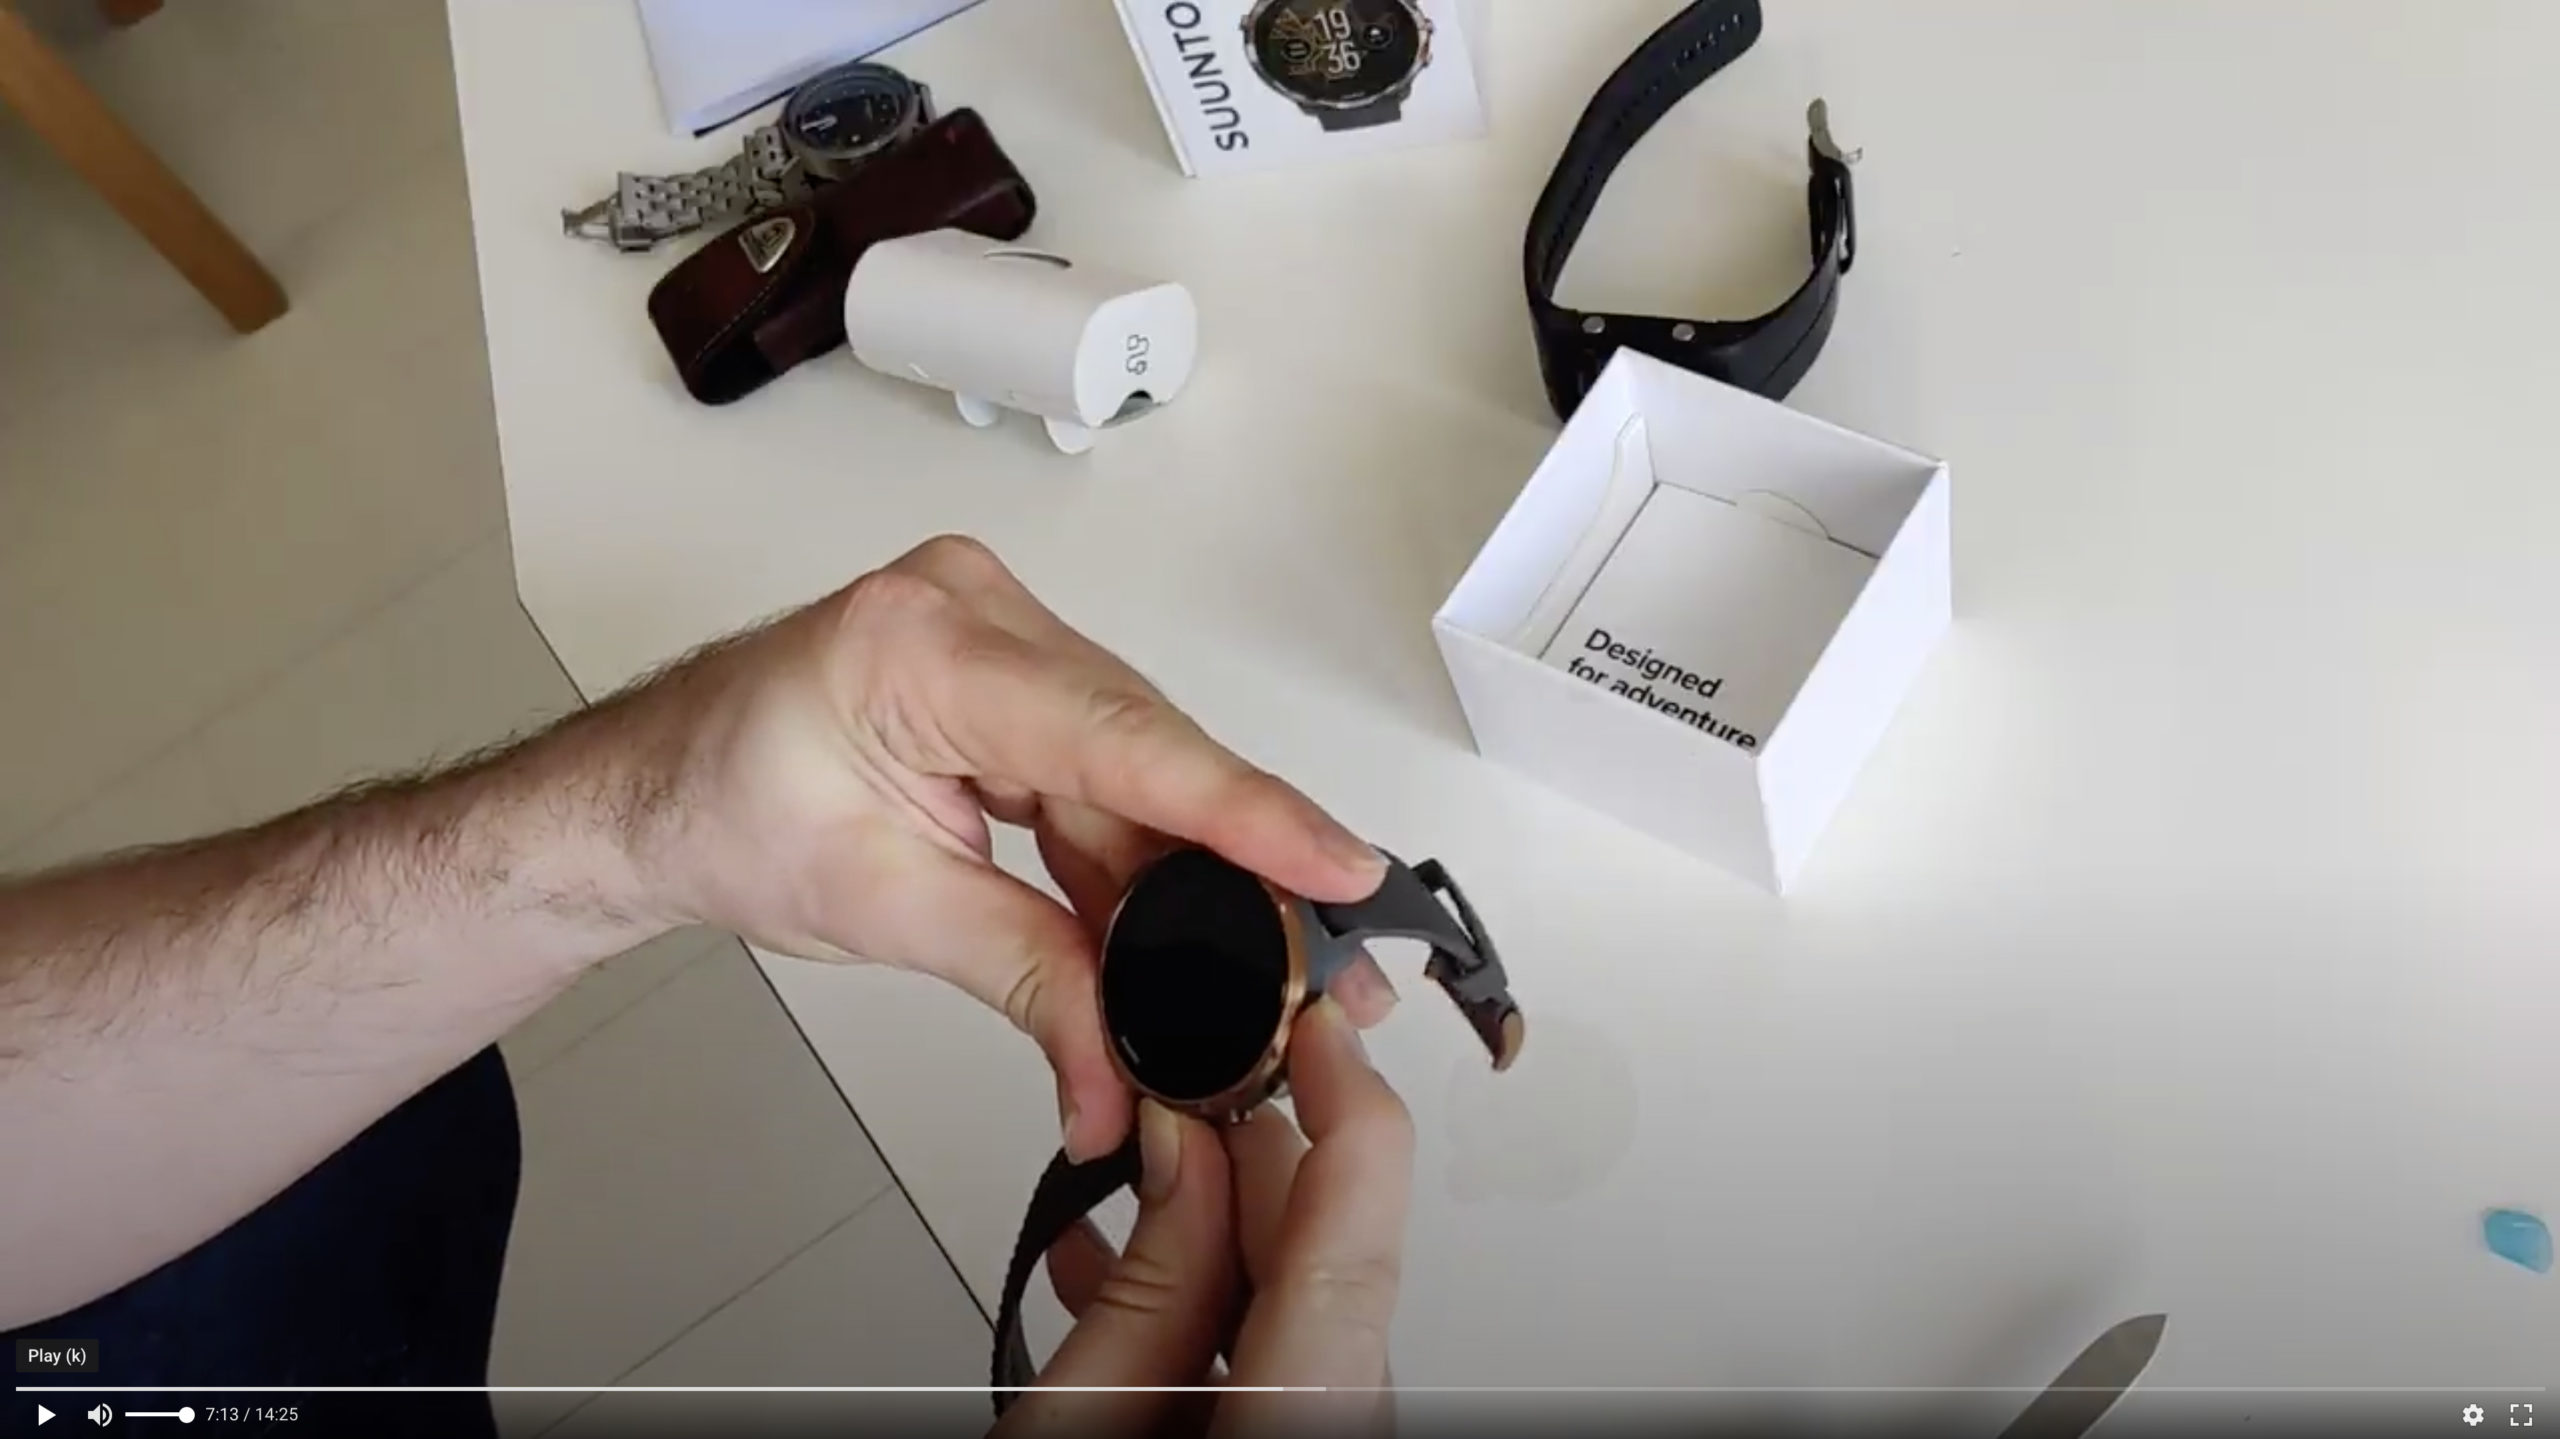 Screen capture of a video that shows the Suunto 7 unboxing. The photo shows two hands holding a watch. On the background you can see a desk and a watch package that has been opened.